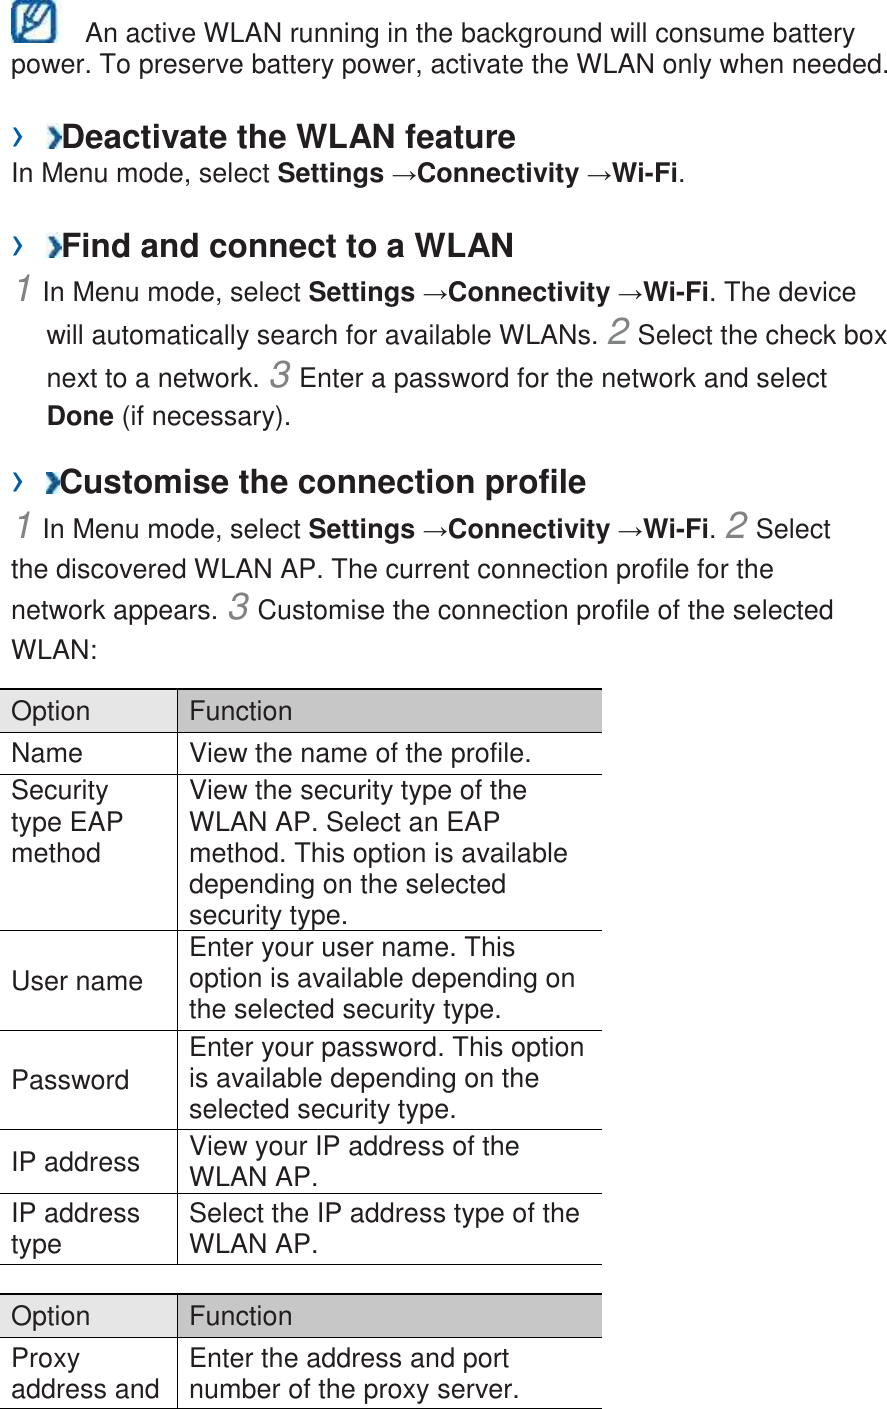   An active WLAN running in the background will consume battery power. To preserve battery power, activate the WLAN only when needed.    ›  Deactivate the WLAN feature   In Menu mode, select Settings →Connectivity →Wi-Fi.    ›  Find and connect to a WLAN   1 In Menu mode, select Settings →Connectivity →Wi-Fi. The device will automatically search for available WLANs. 2 Select the check box next to a network. 3 Enter a password for the network and select Done (if necessary).   ›  Customise the connection profile   1 In Menu mode, select Settings →Connectivity →Wi-Fi. 2 Select the discovered WLAN AP. The current connection profile for the network appears. 3 Customise the connection profile of the selected WLAN:   Option   Function   Name   View the name of the profile.   Security type EAP method   View the security type of the WLAN AP. Select an EAP method. This option is available depending on the selected security type.   User name   Enter your user name. This option is available depending on the selected security type.   Password   Enter your password. This option is available depending on the selected security type.   IP address   View your IP address of the WLAN AP.   IP address type   Select the IP address type of the WLAN AP.    Option   Function   Proxy address and Enter the address and port number of the proxy server.   